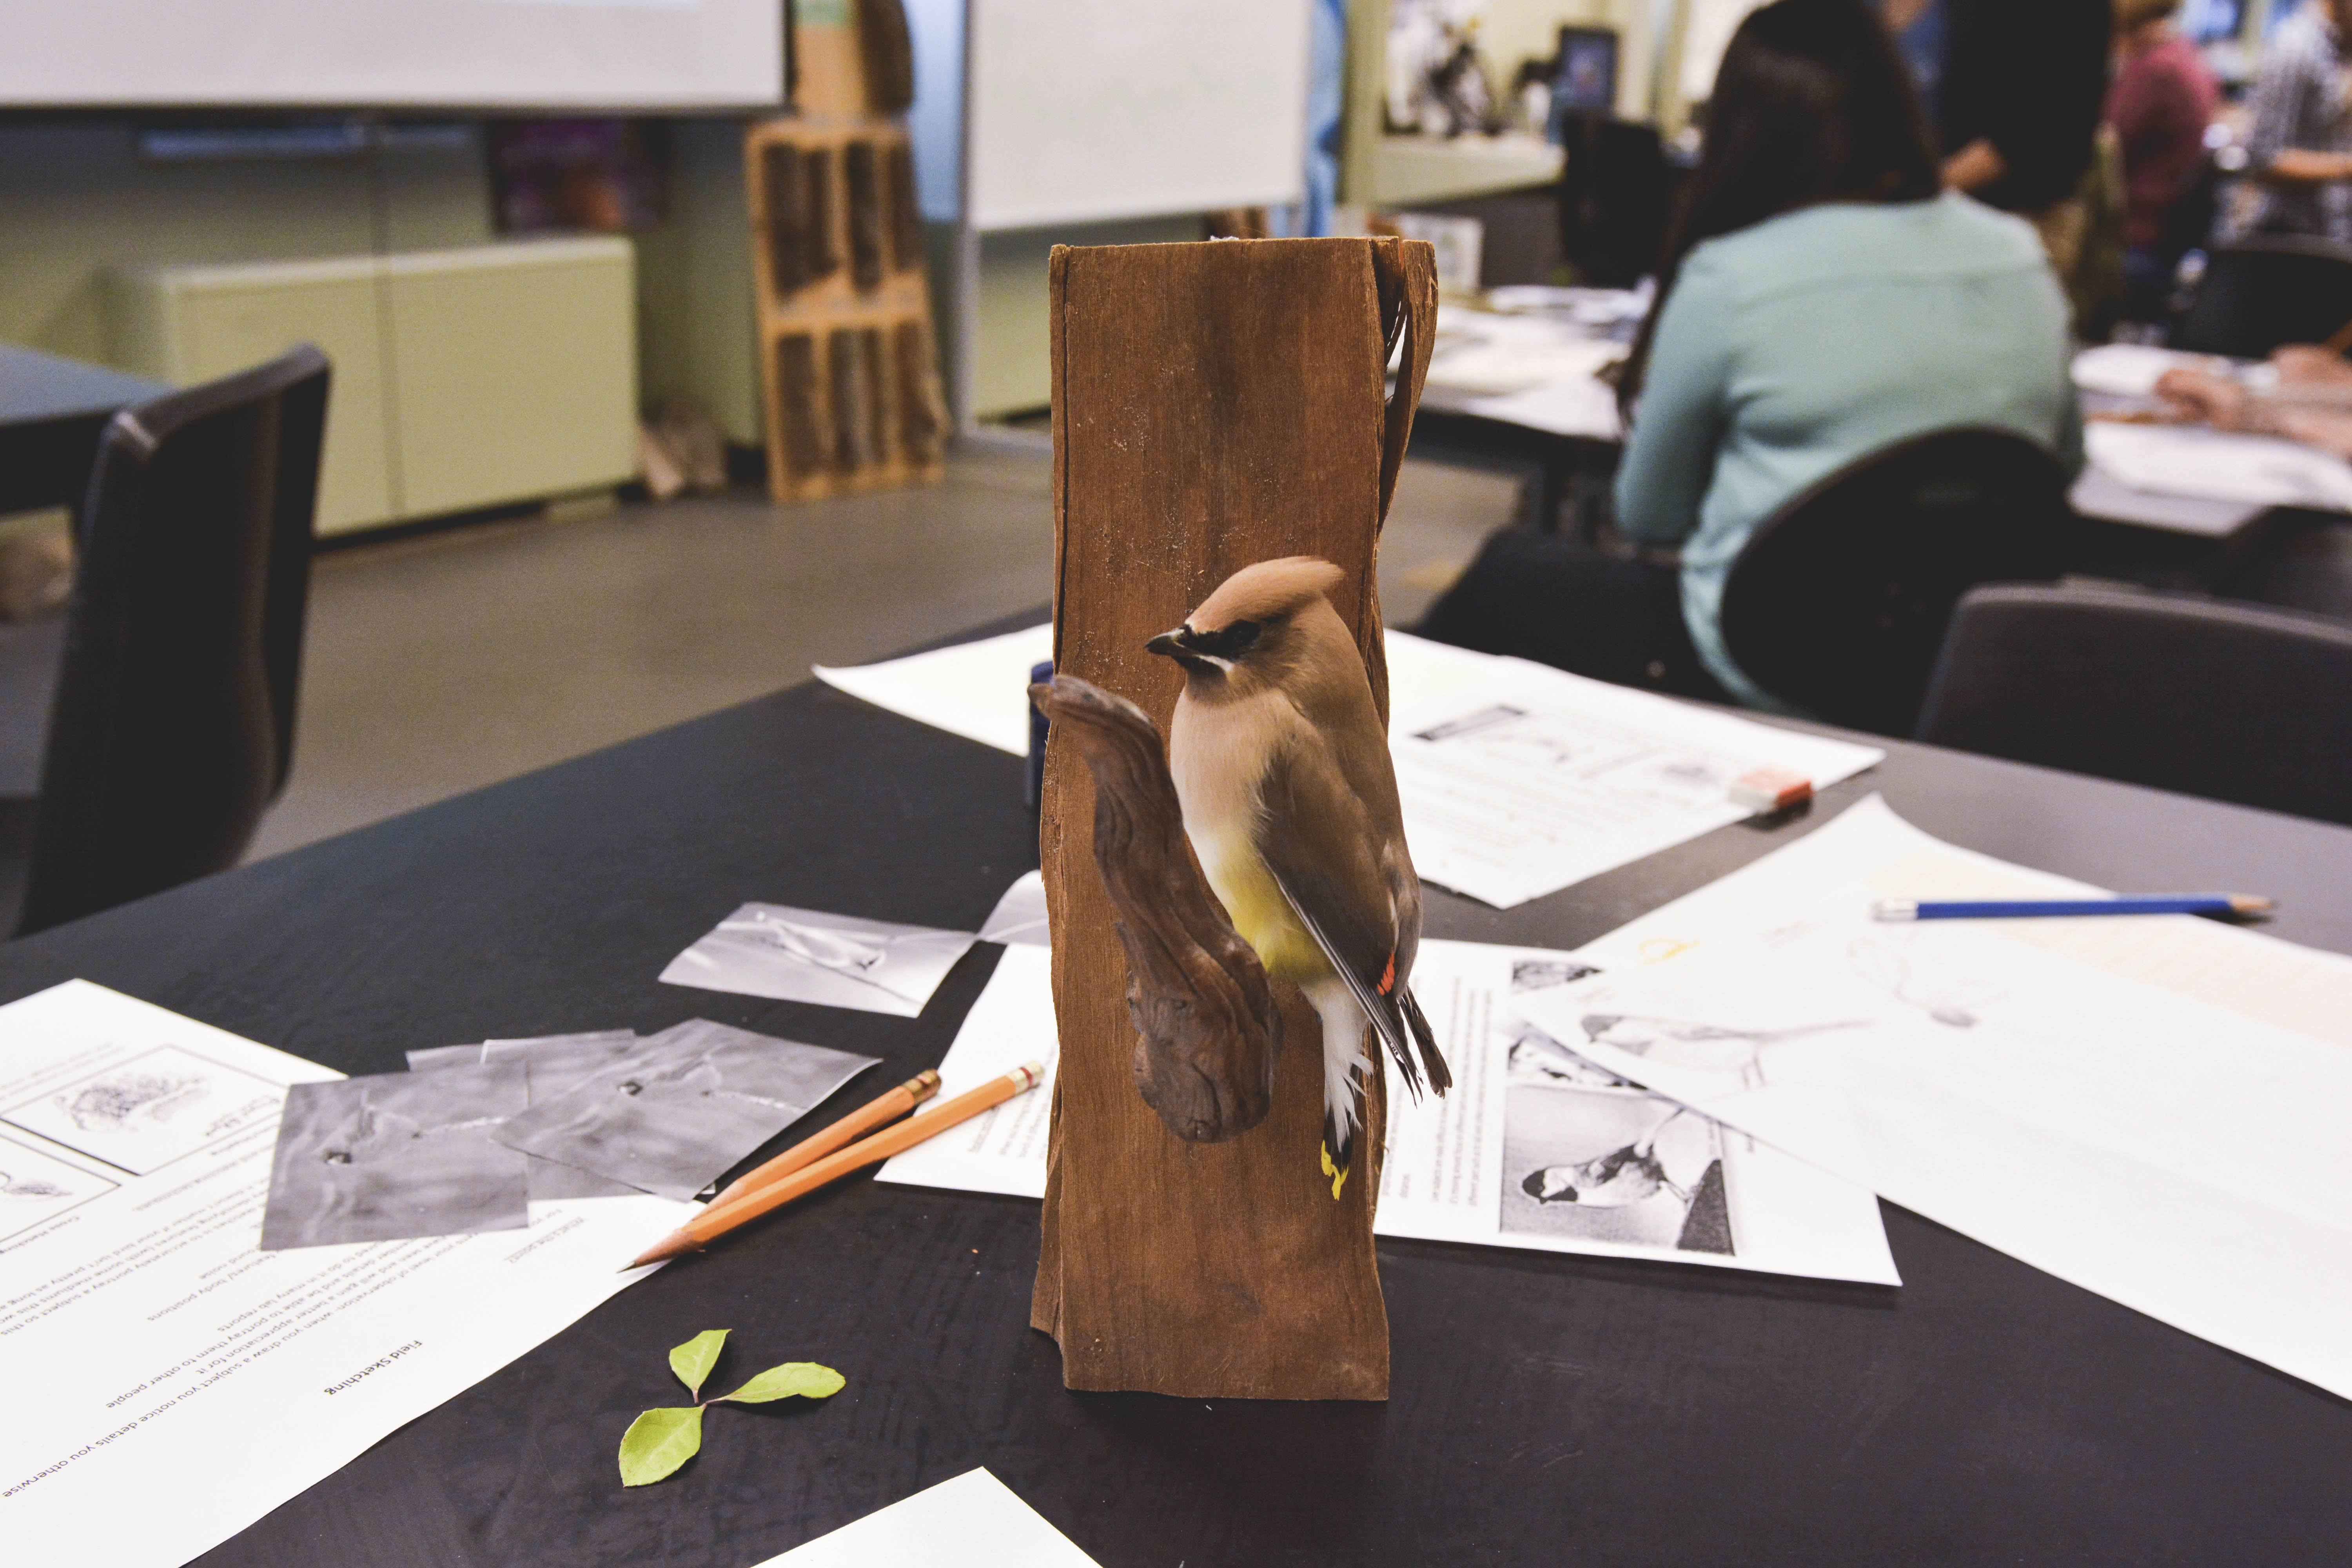 Props were used to practice nature sketching. Photo by Ju Hyun Kim